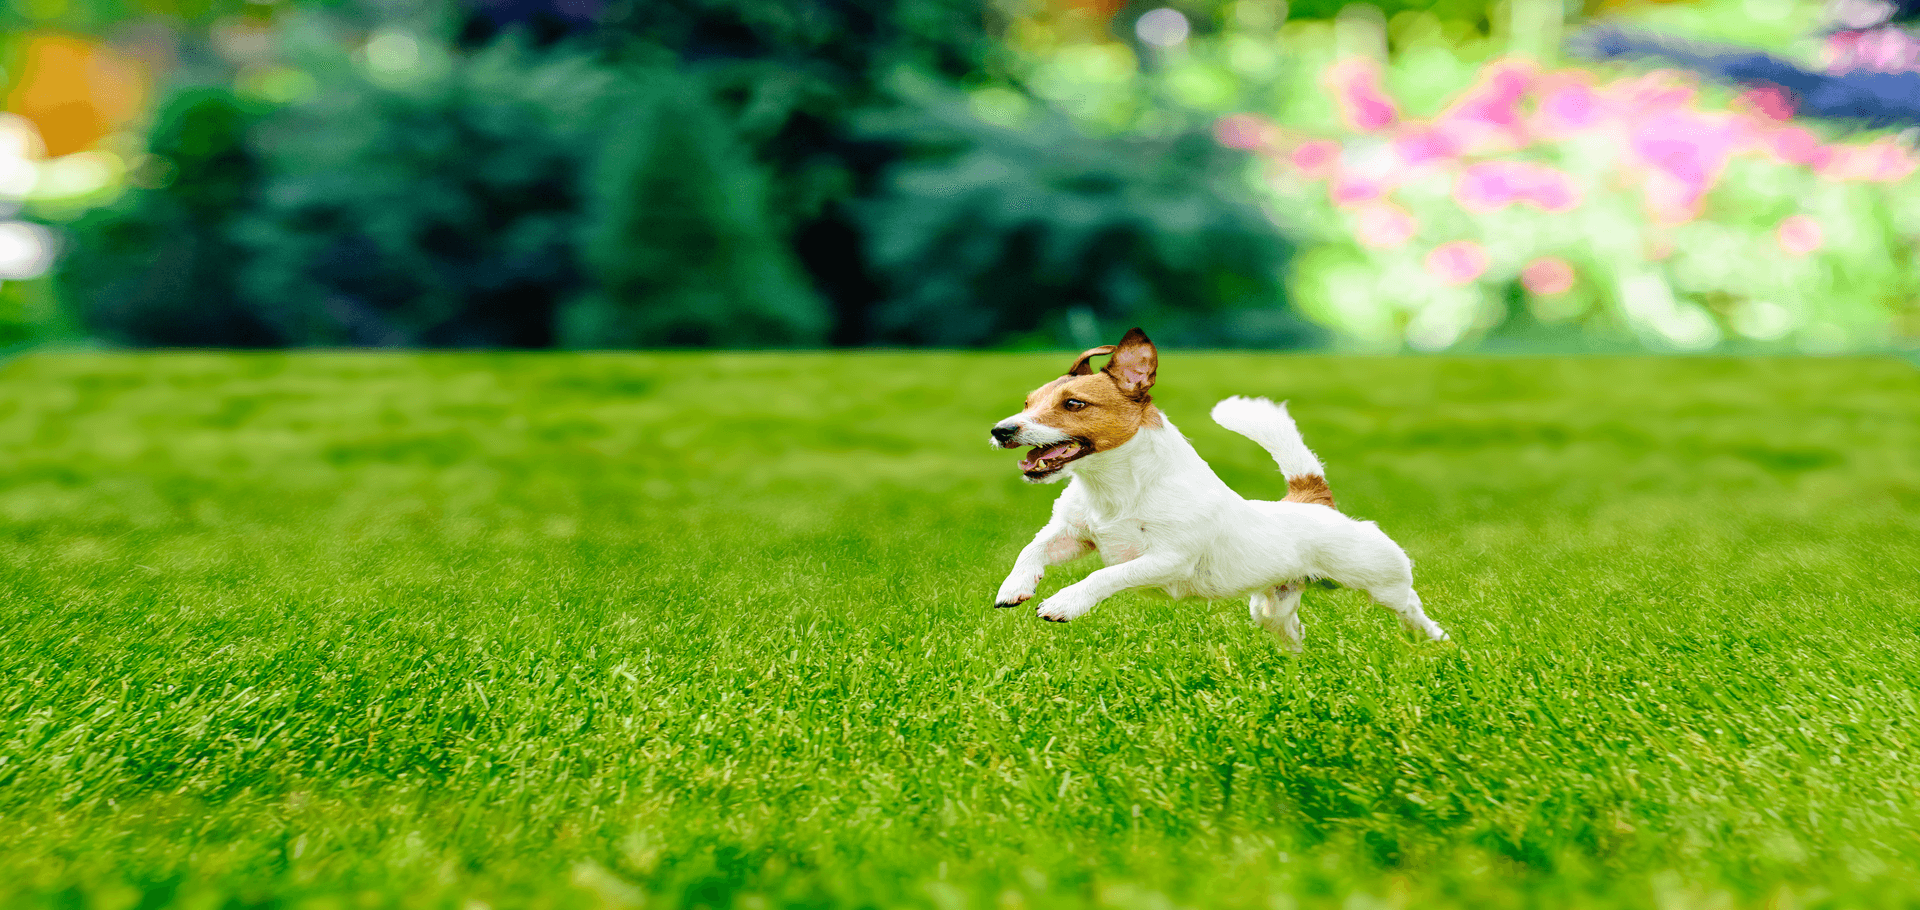 How to care for a lawn with dogs